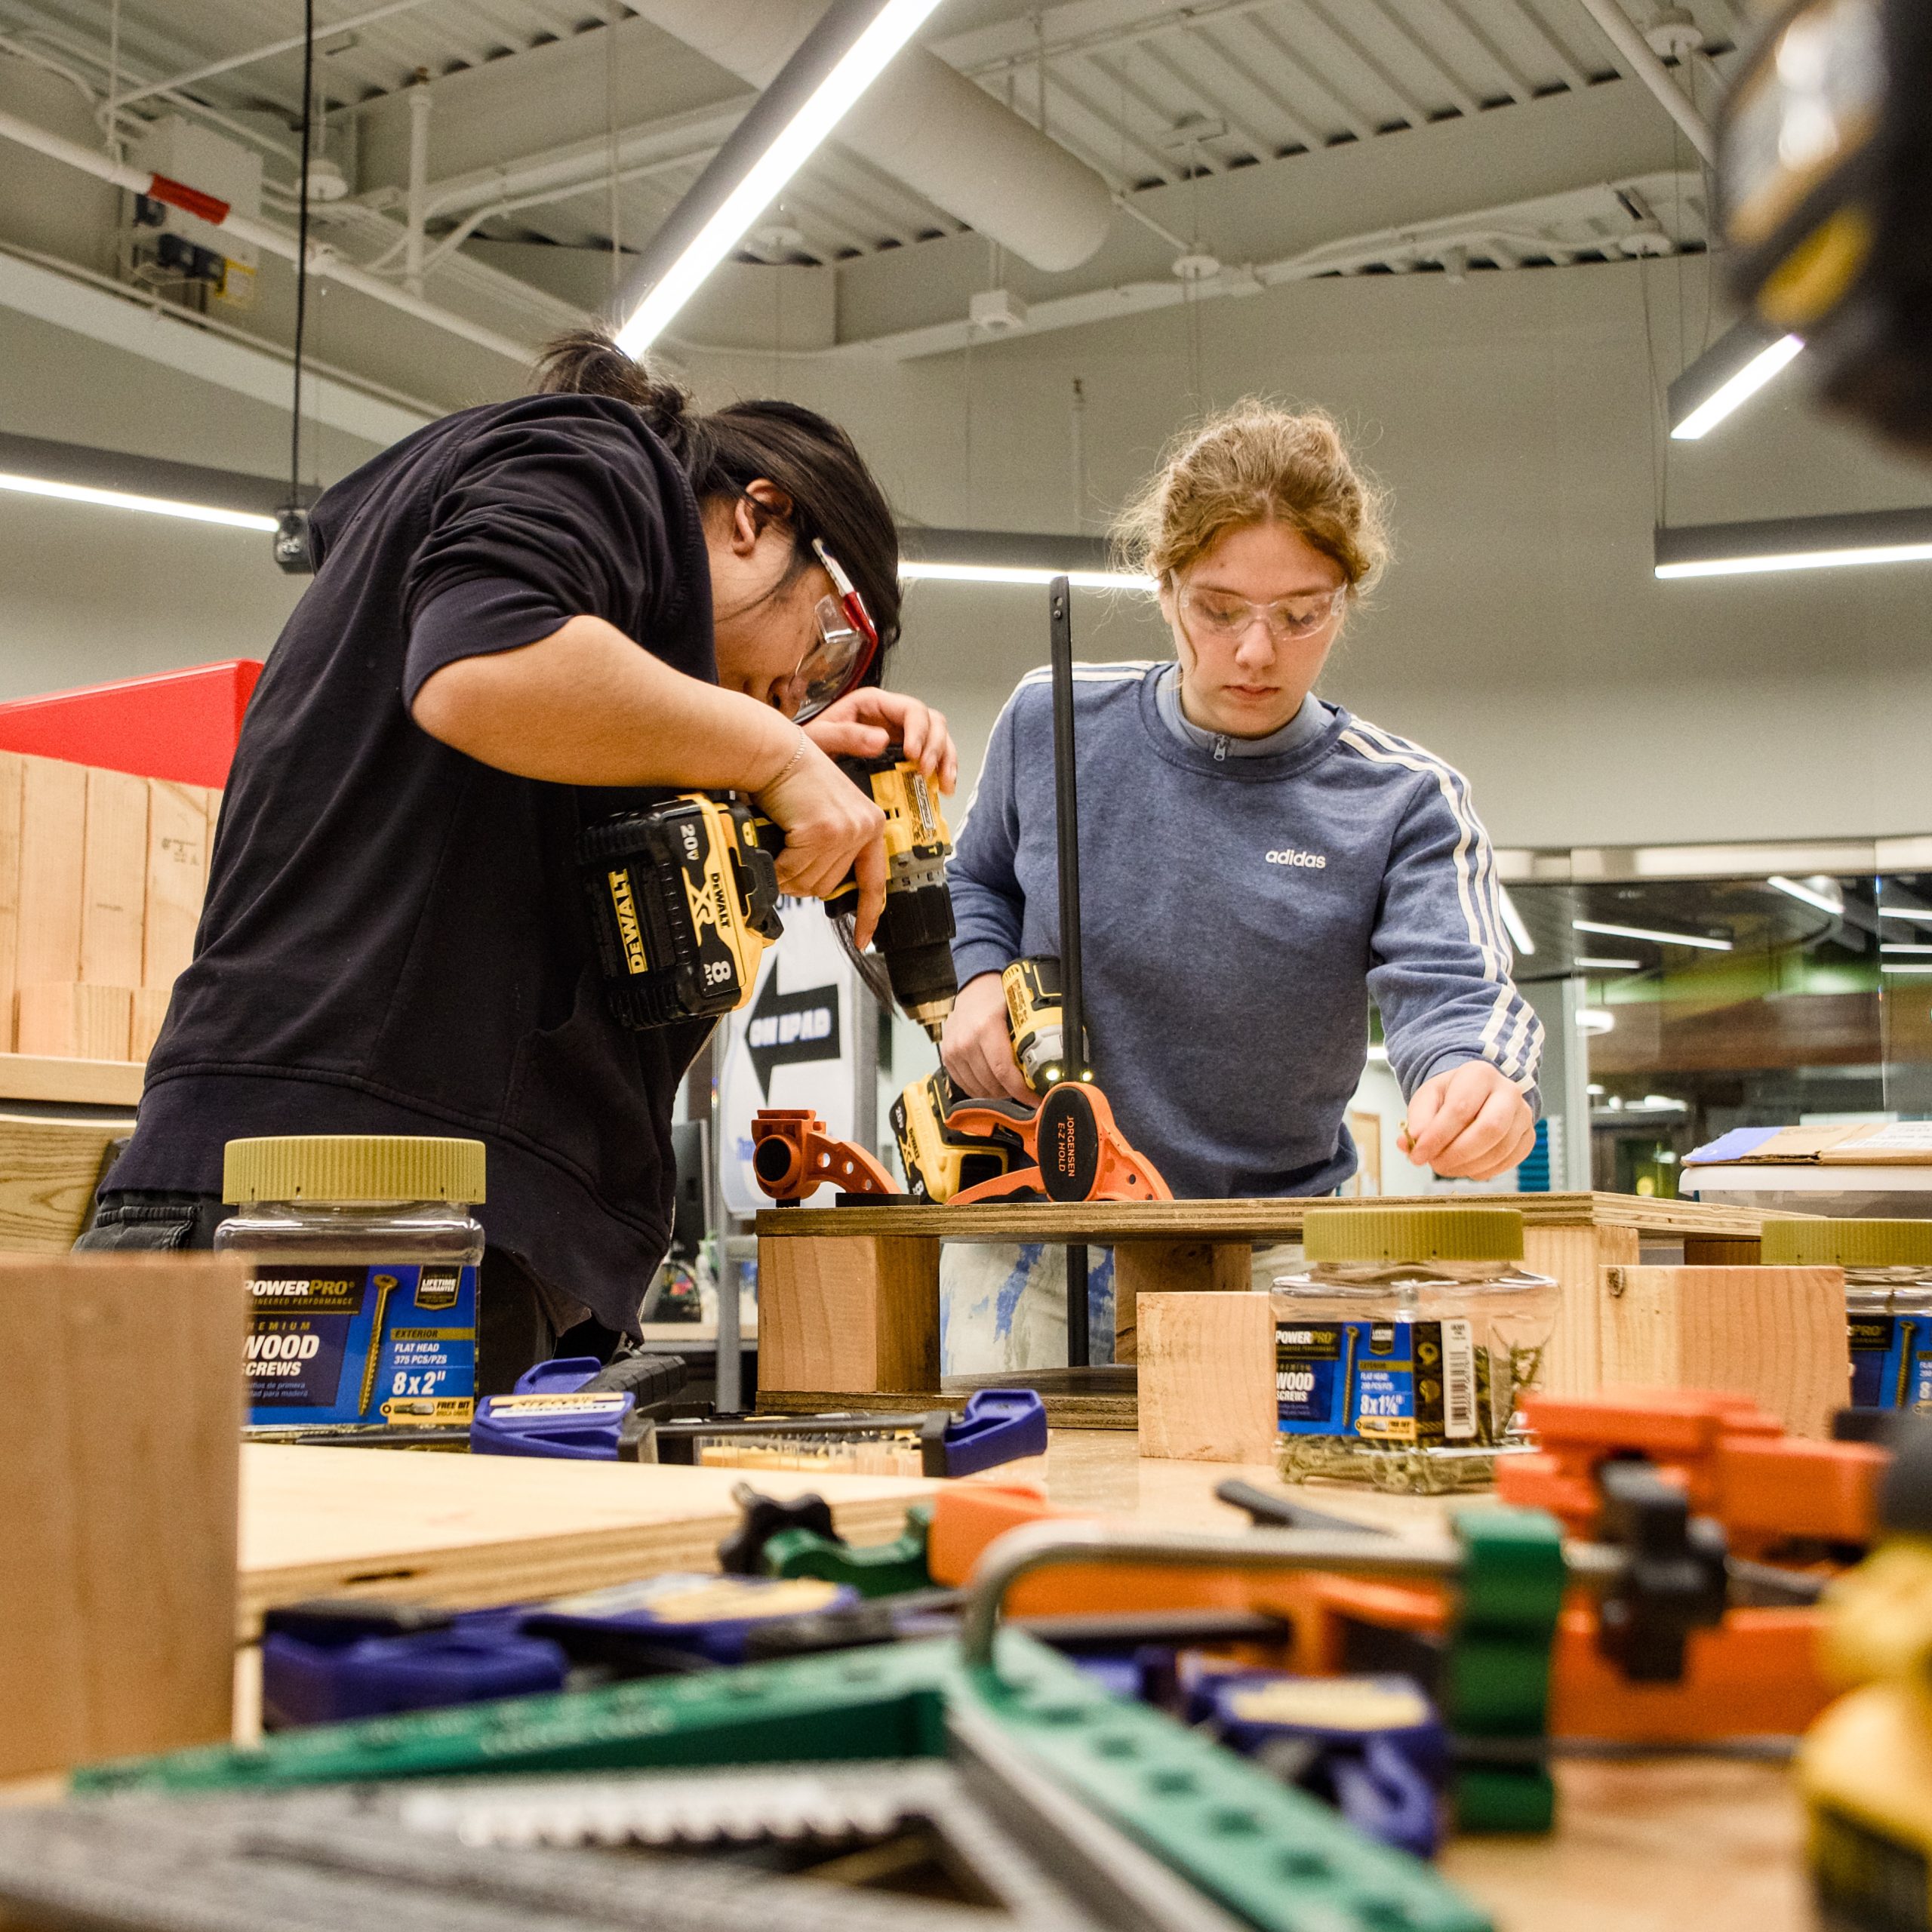 Two Maker Mentors construct a wooden base using drills, rulers, and other woodworking tools.